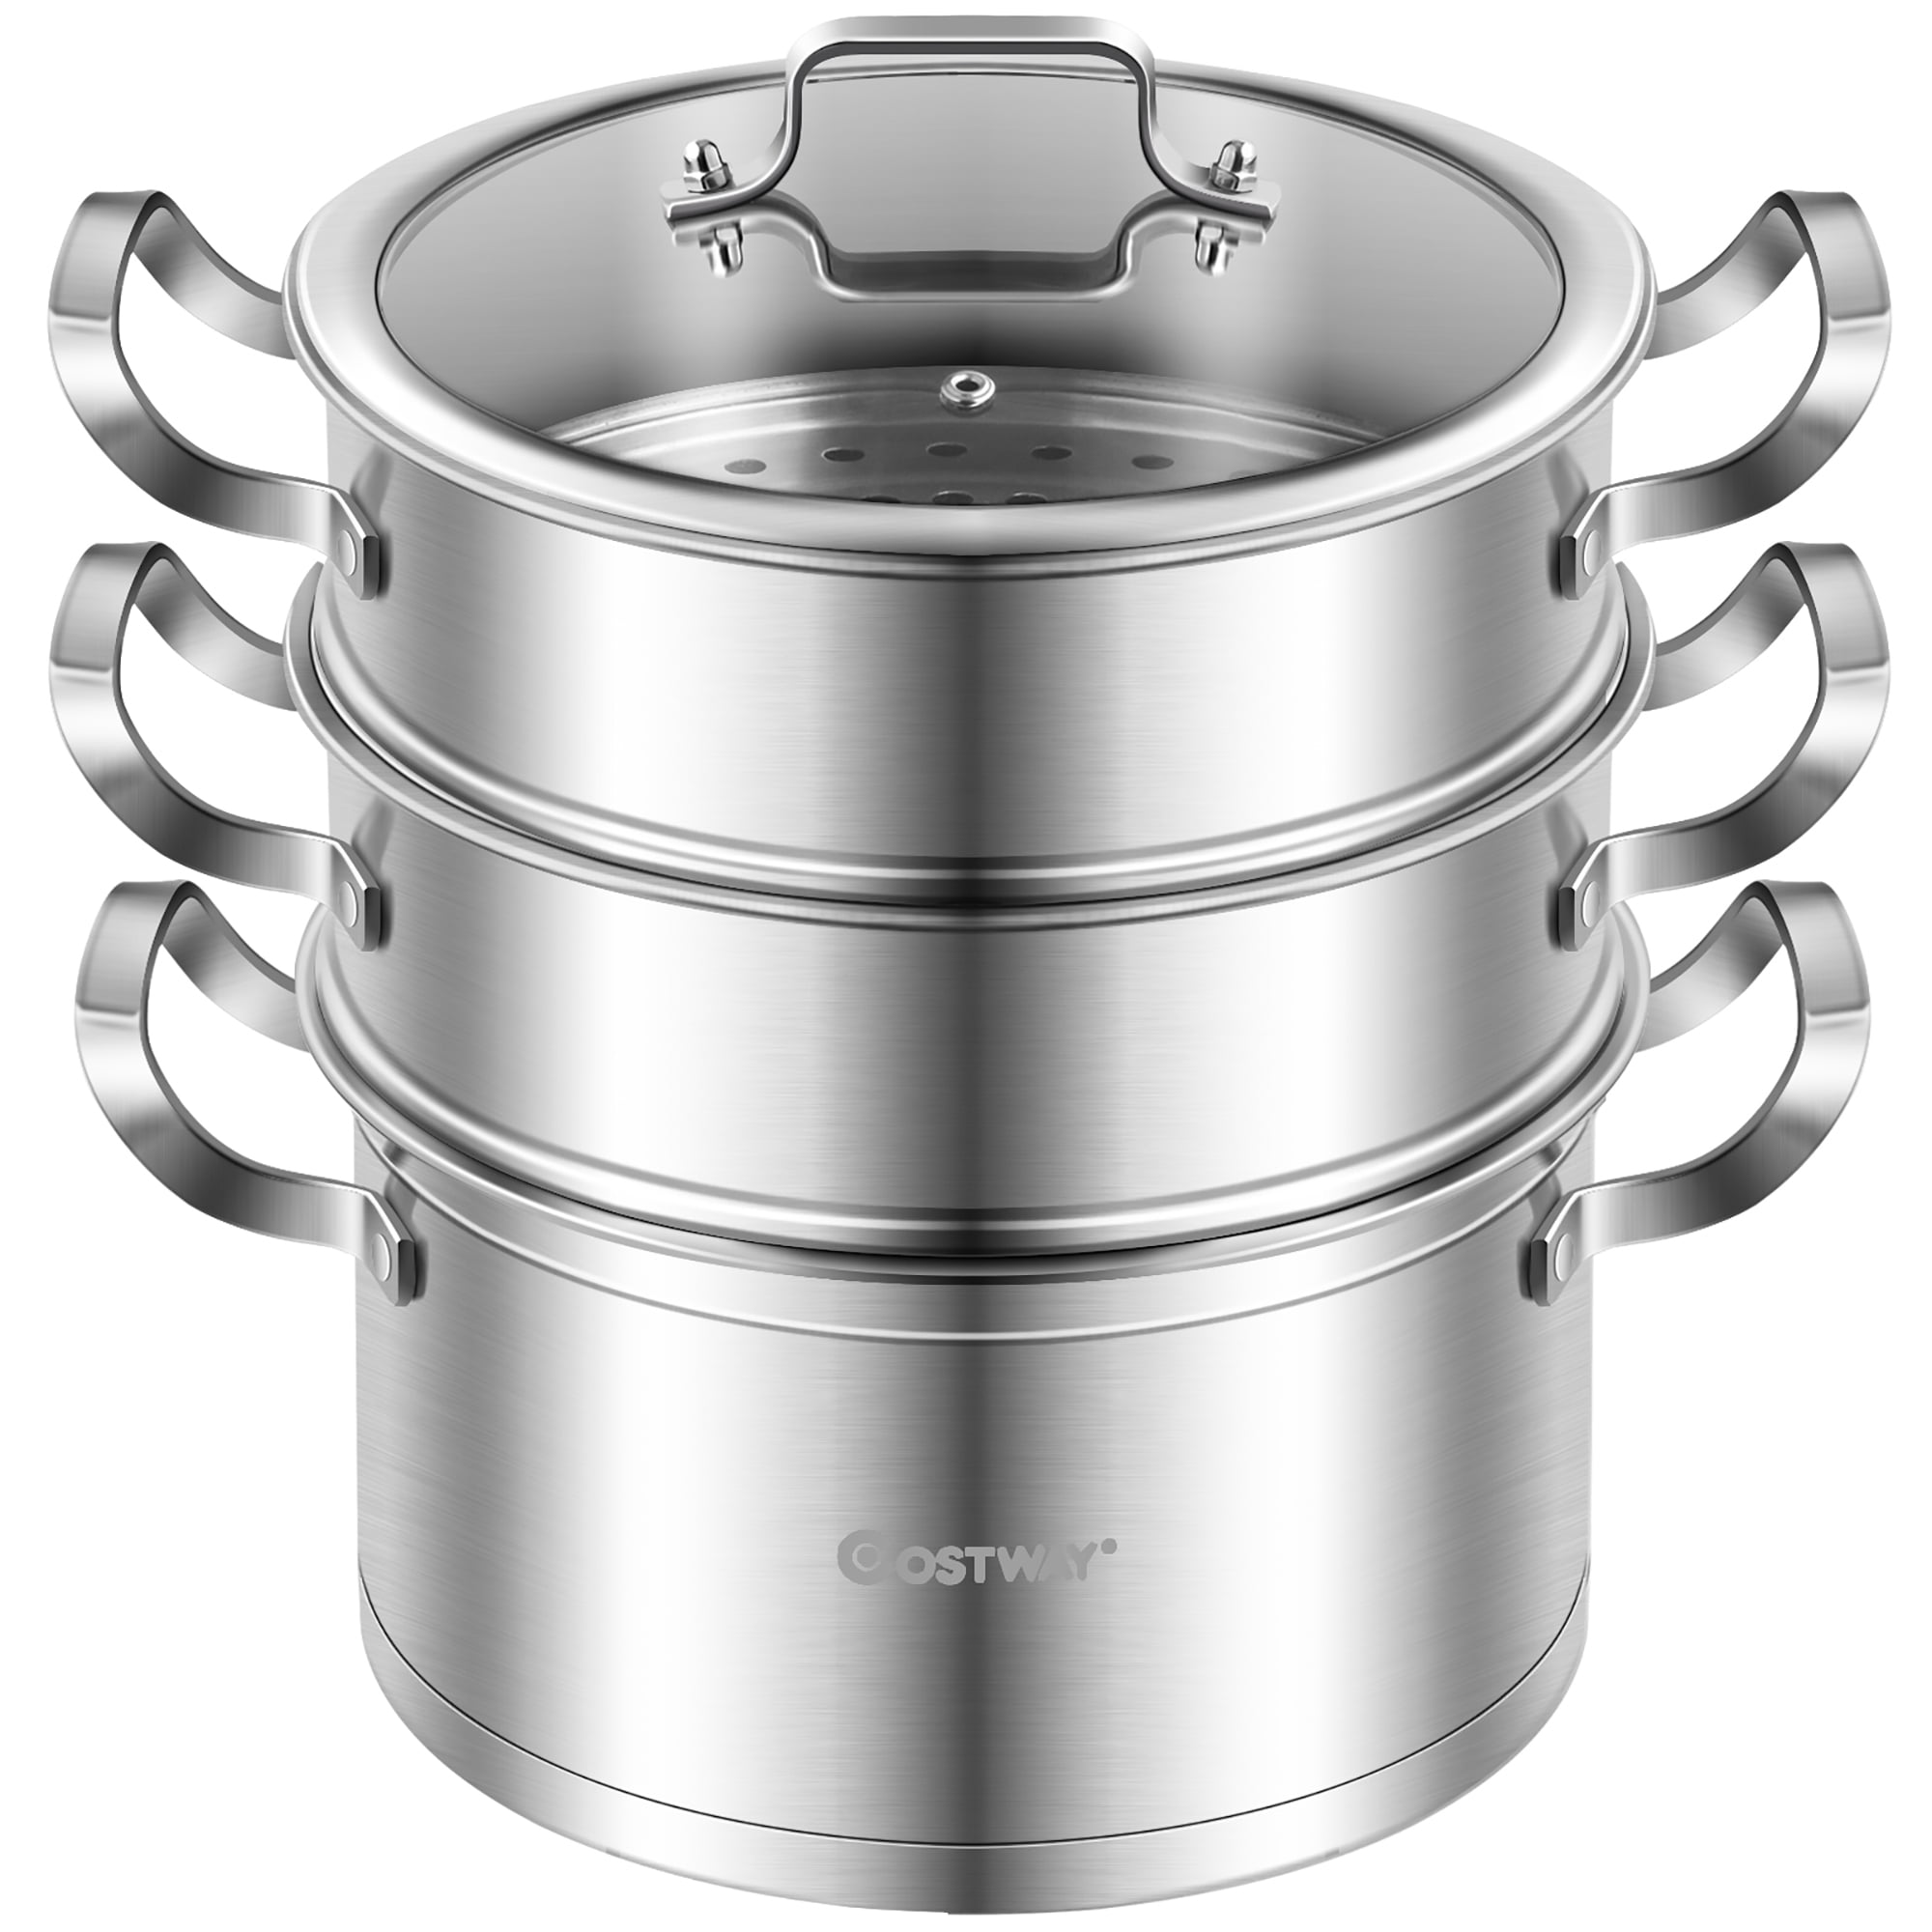 SUNHOUSE Steamer Pot for Cooking 8-inch Steam Pots with Lid, 3 Quarts  Multipurpose Stock Pot Stainless Steel Steaming Pot Cookware with Handle  for